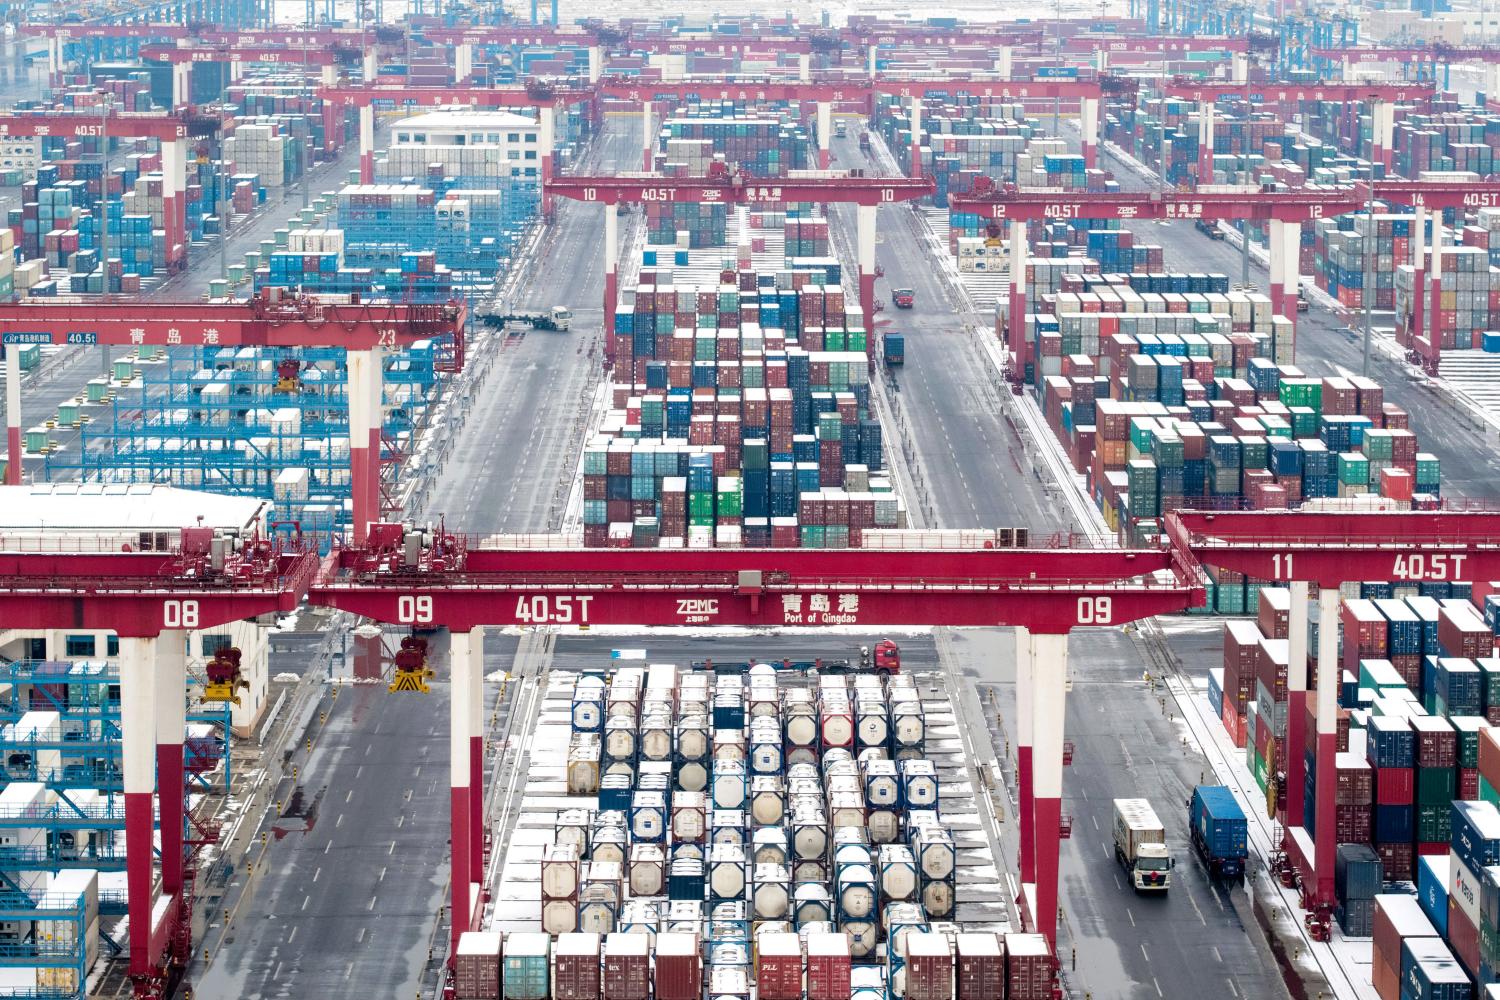 Containers and trucks are seen following a snowfall at the port of Qingdao, Shandong province, China February 14, 2019. REUTERS/Stringer ATTENTION EDITORS - THIS IMAGE WAS PROVIDED BY A THIRD PARTY. CHINA OUT. - RC1AA7D4CB70